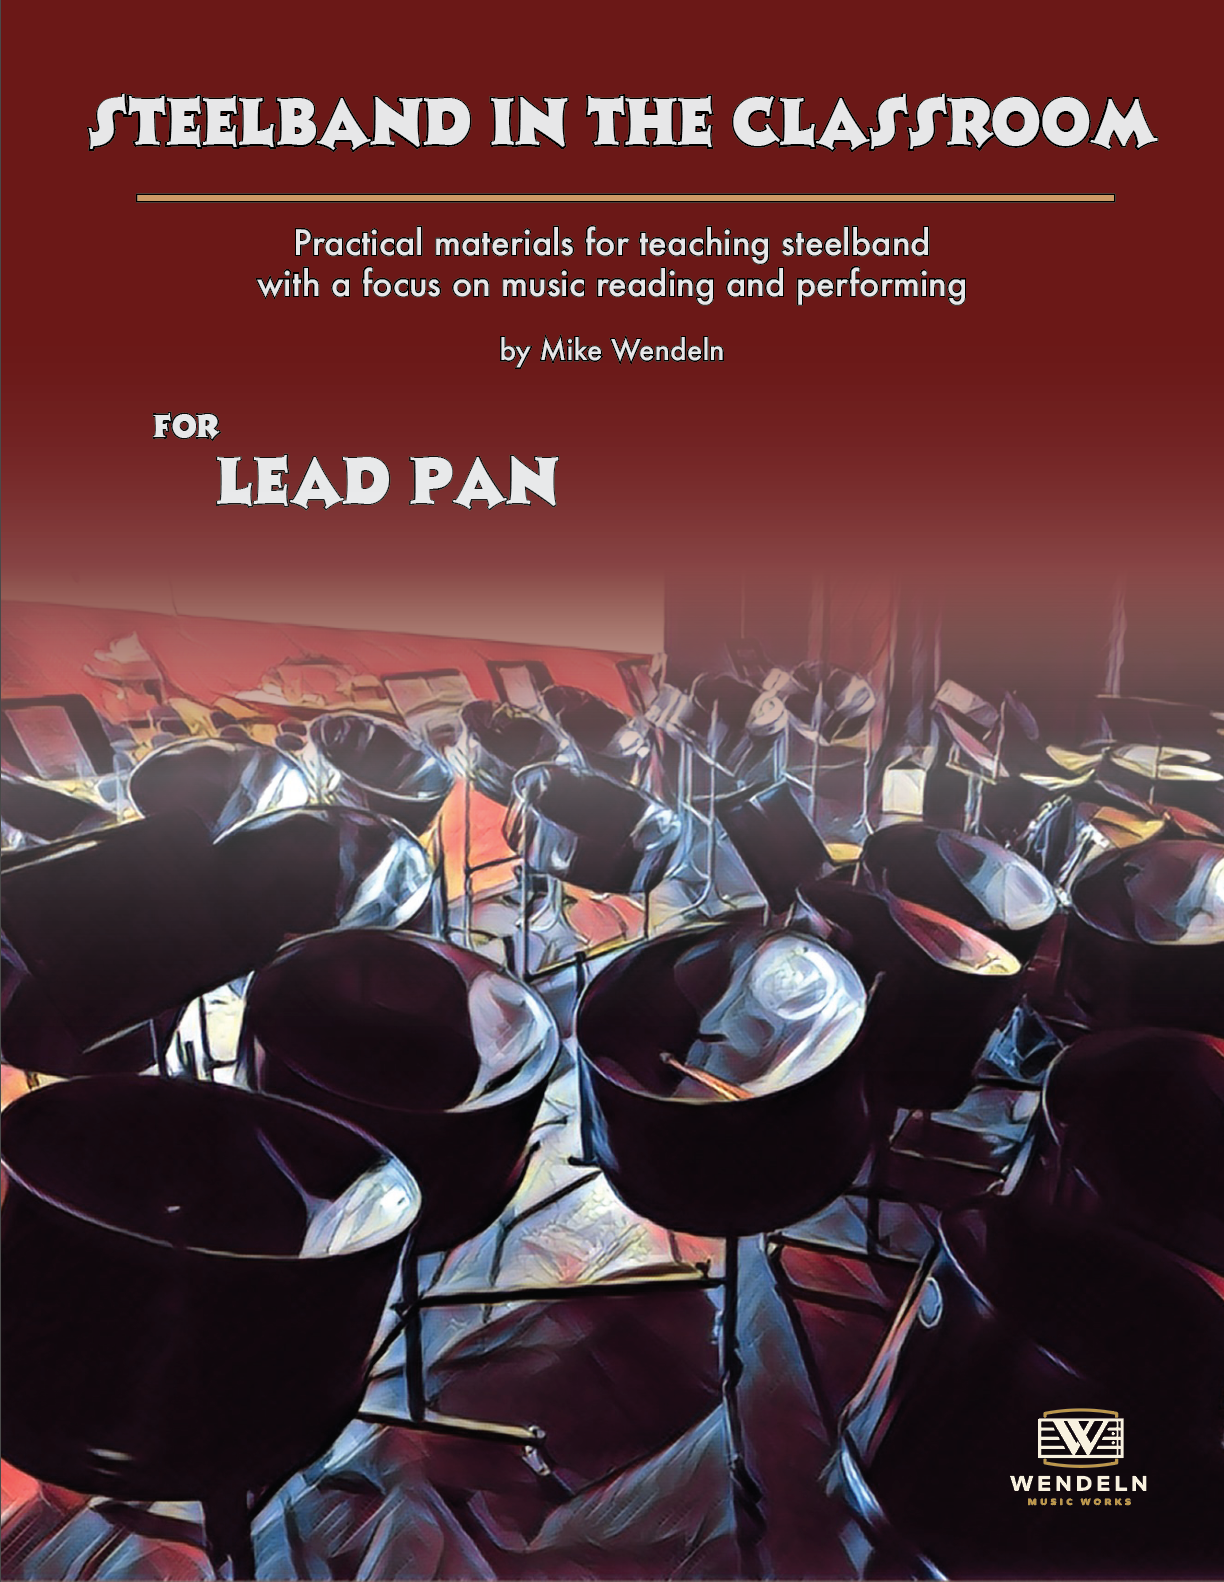 The Steelpan Store – Bringing It All Together